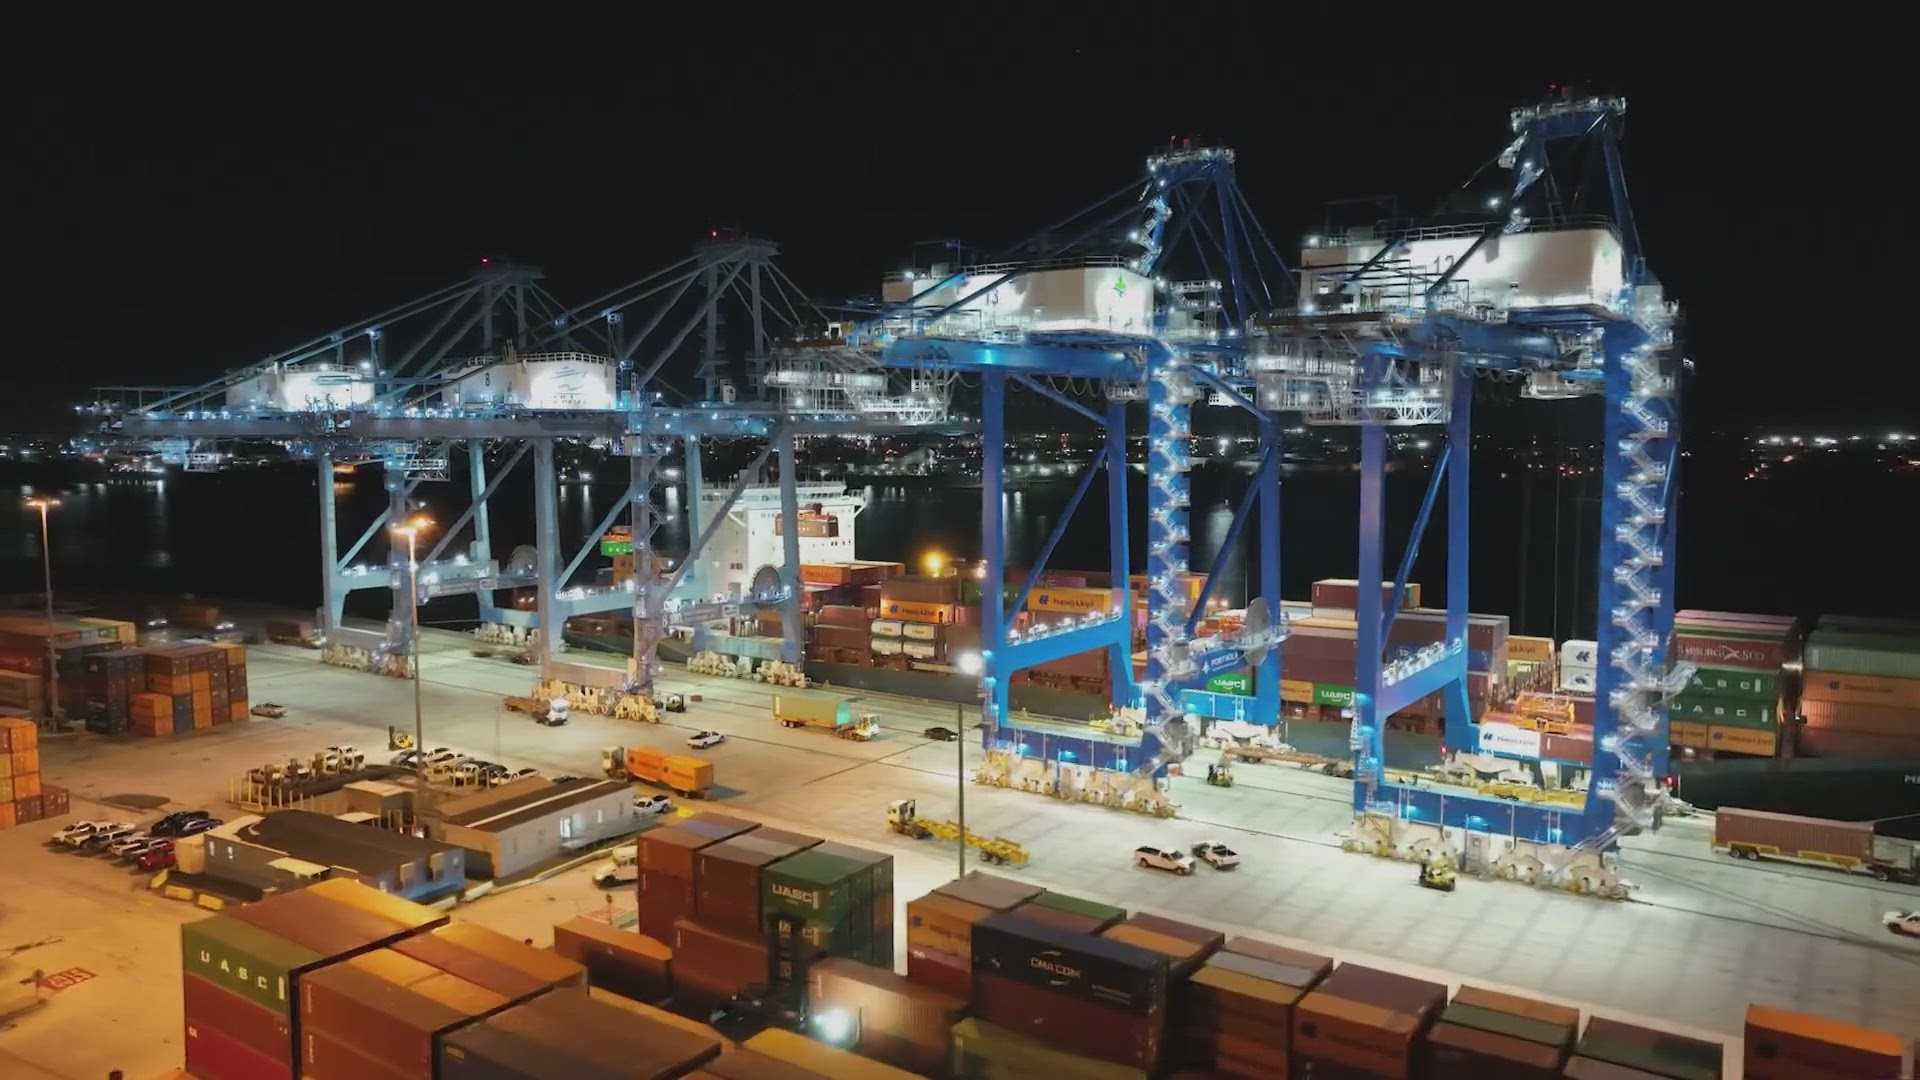 We take a look at the important work the Port of New Orleans does.